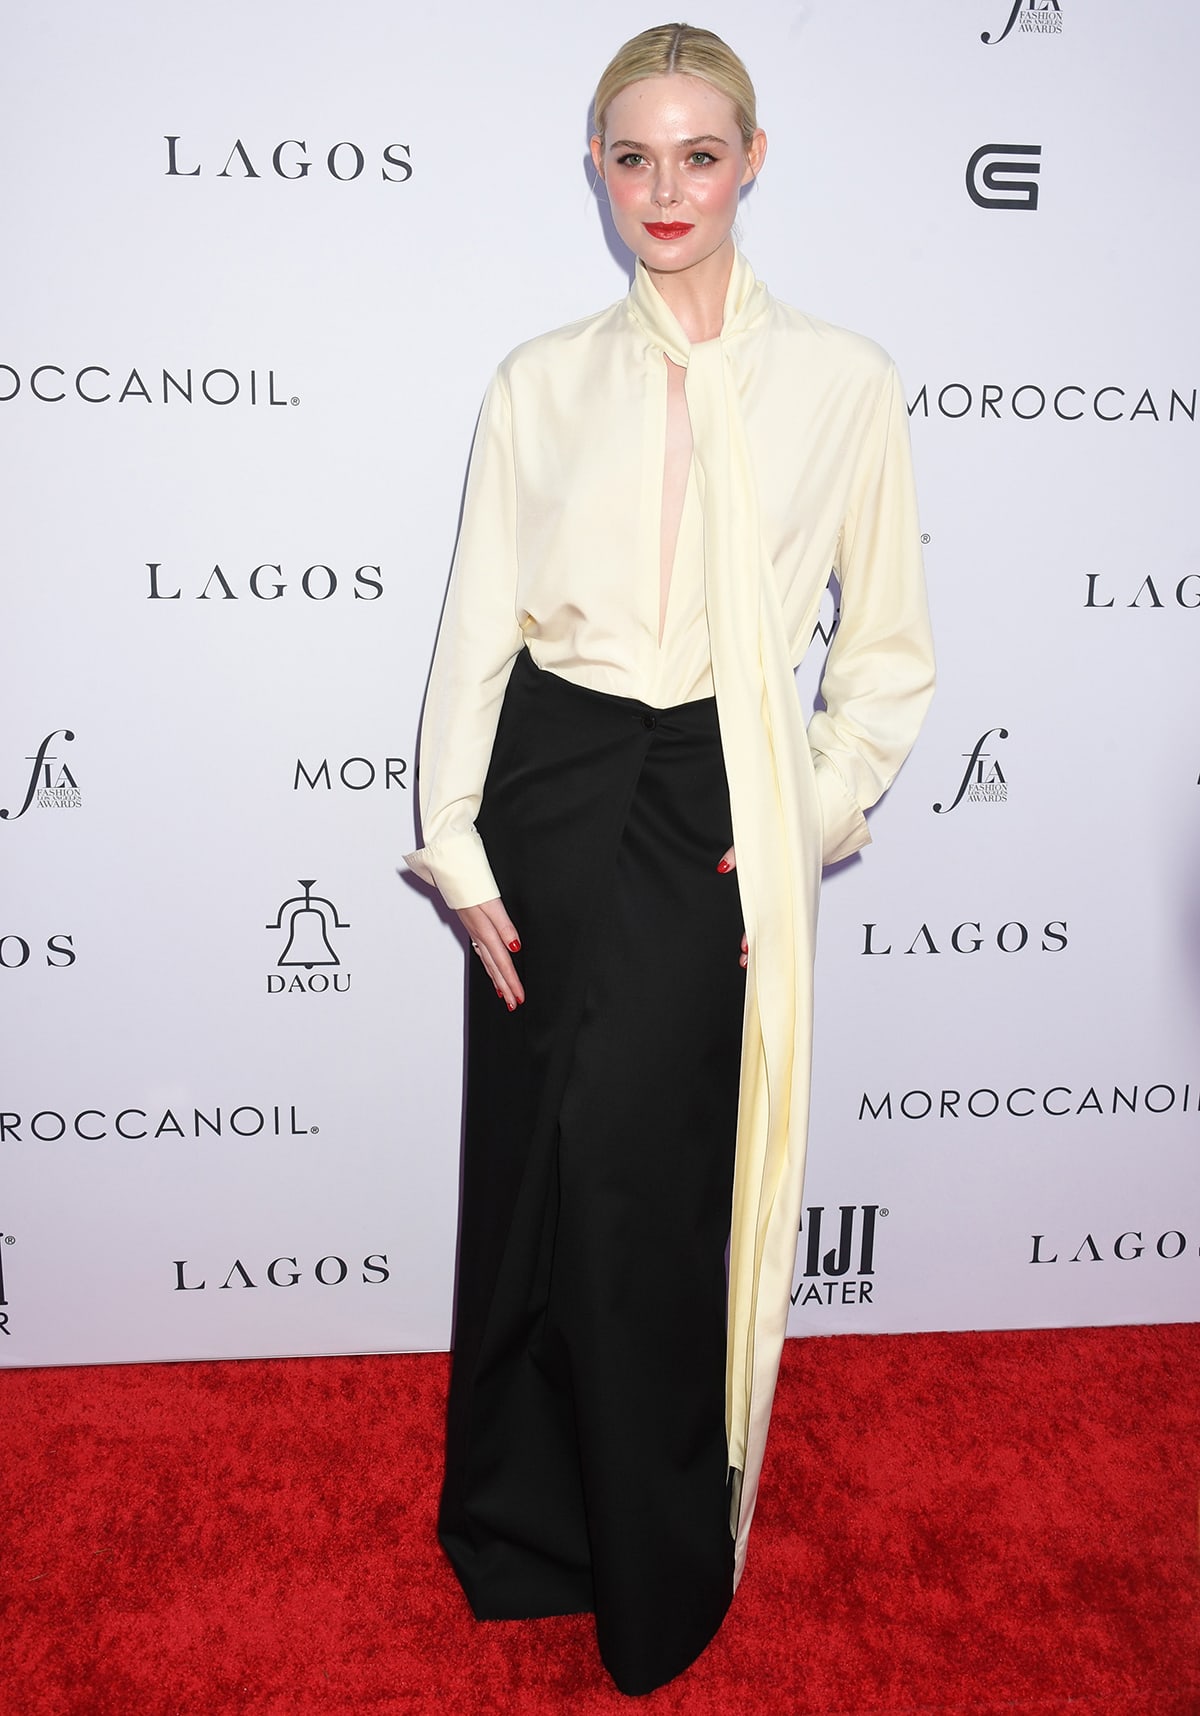 Elle Fanning channels girl boss in a cream pussy bow blouse and a black maxi skirt by Givenchy at Daily Front Row’s 7th Annual Fashion Los Angeles Awards on April 23, 2023